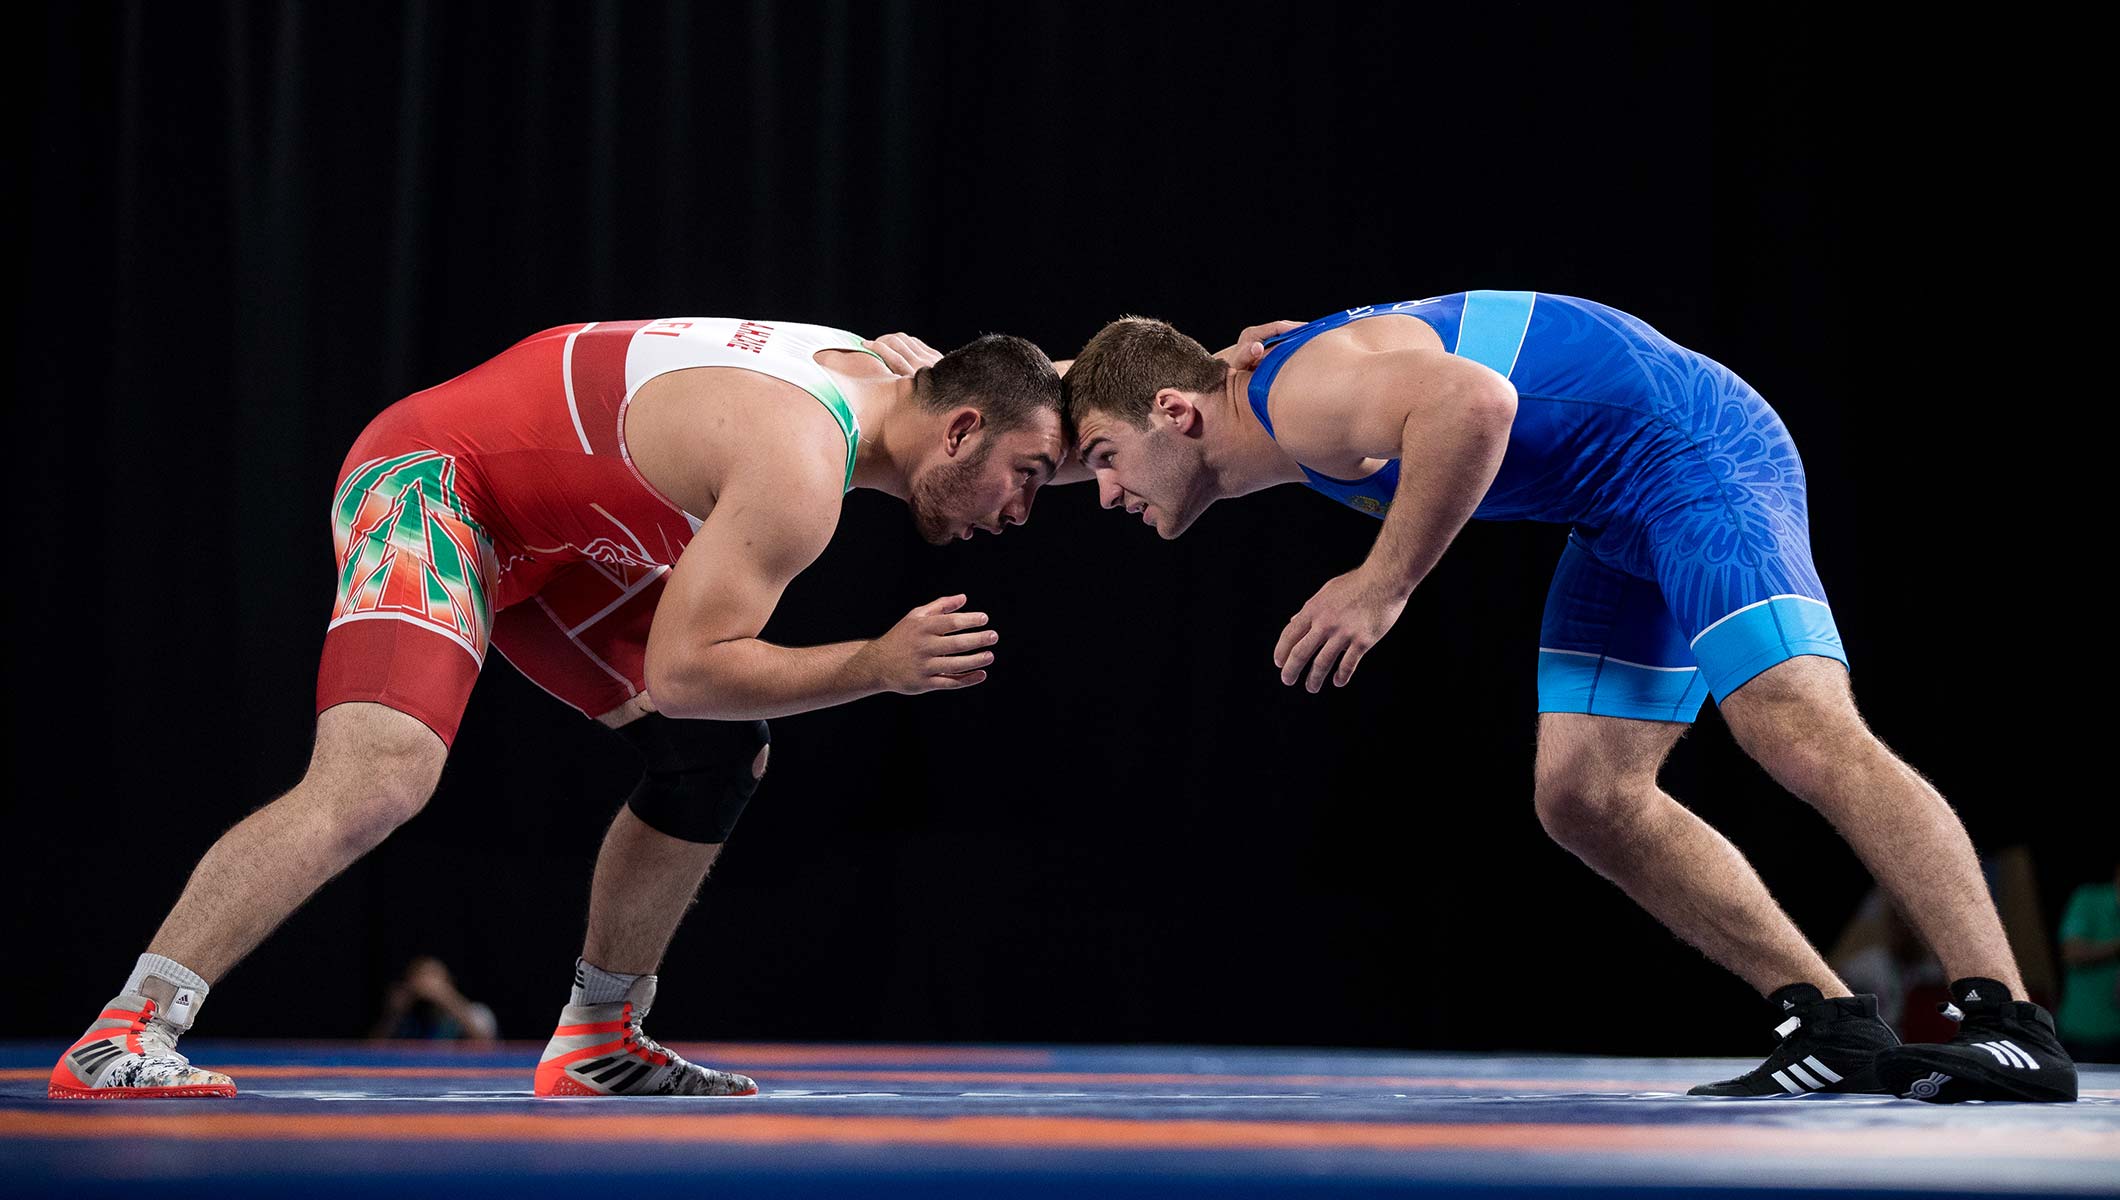 Wrestling is a combat sport involving grappling-type techniques such as cli...